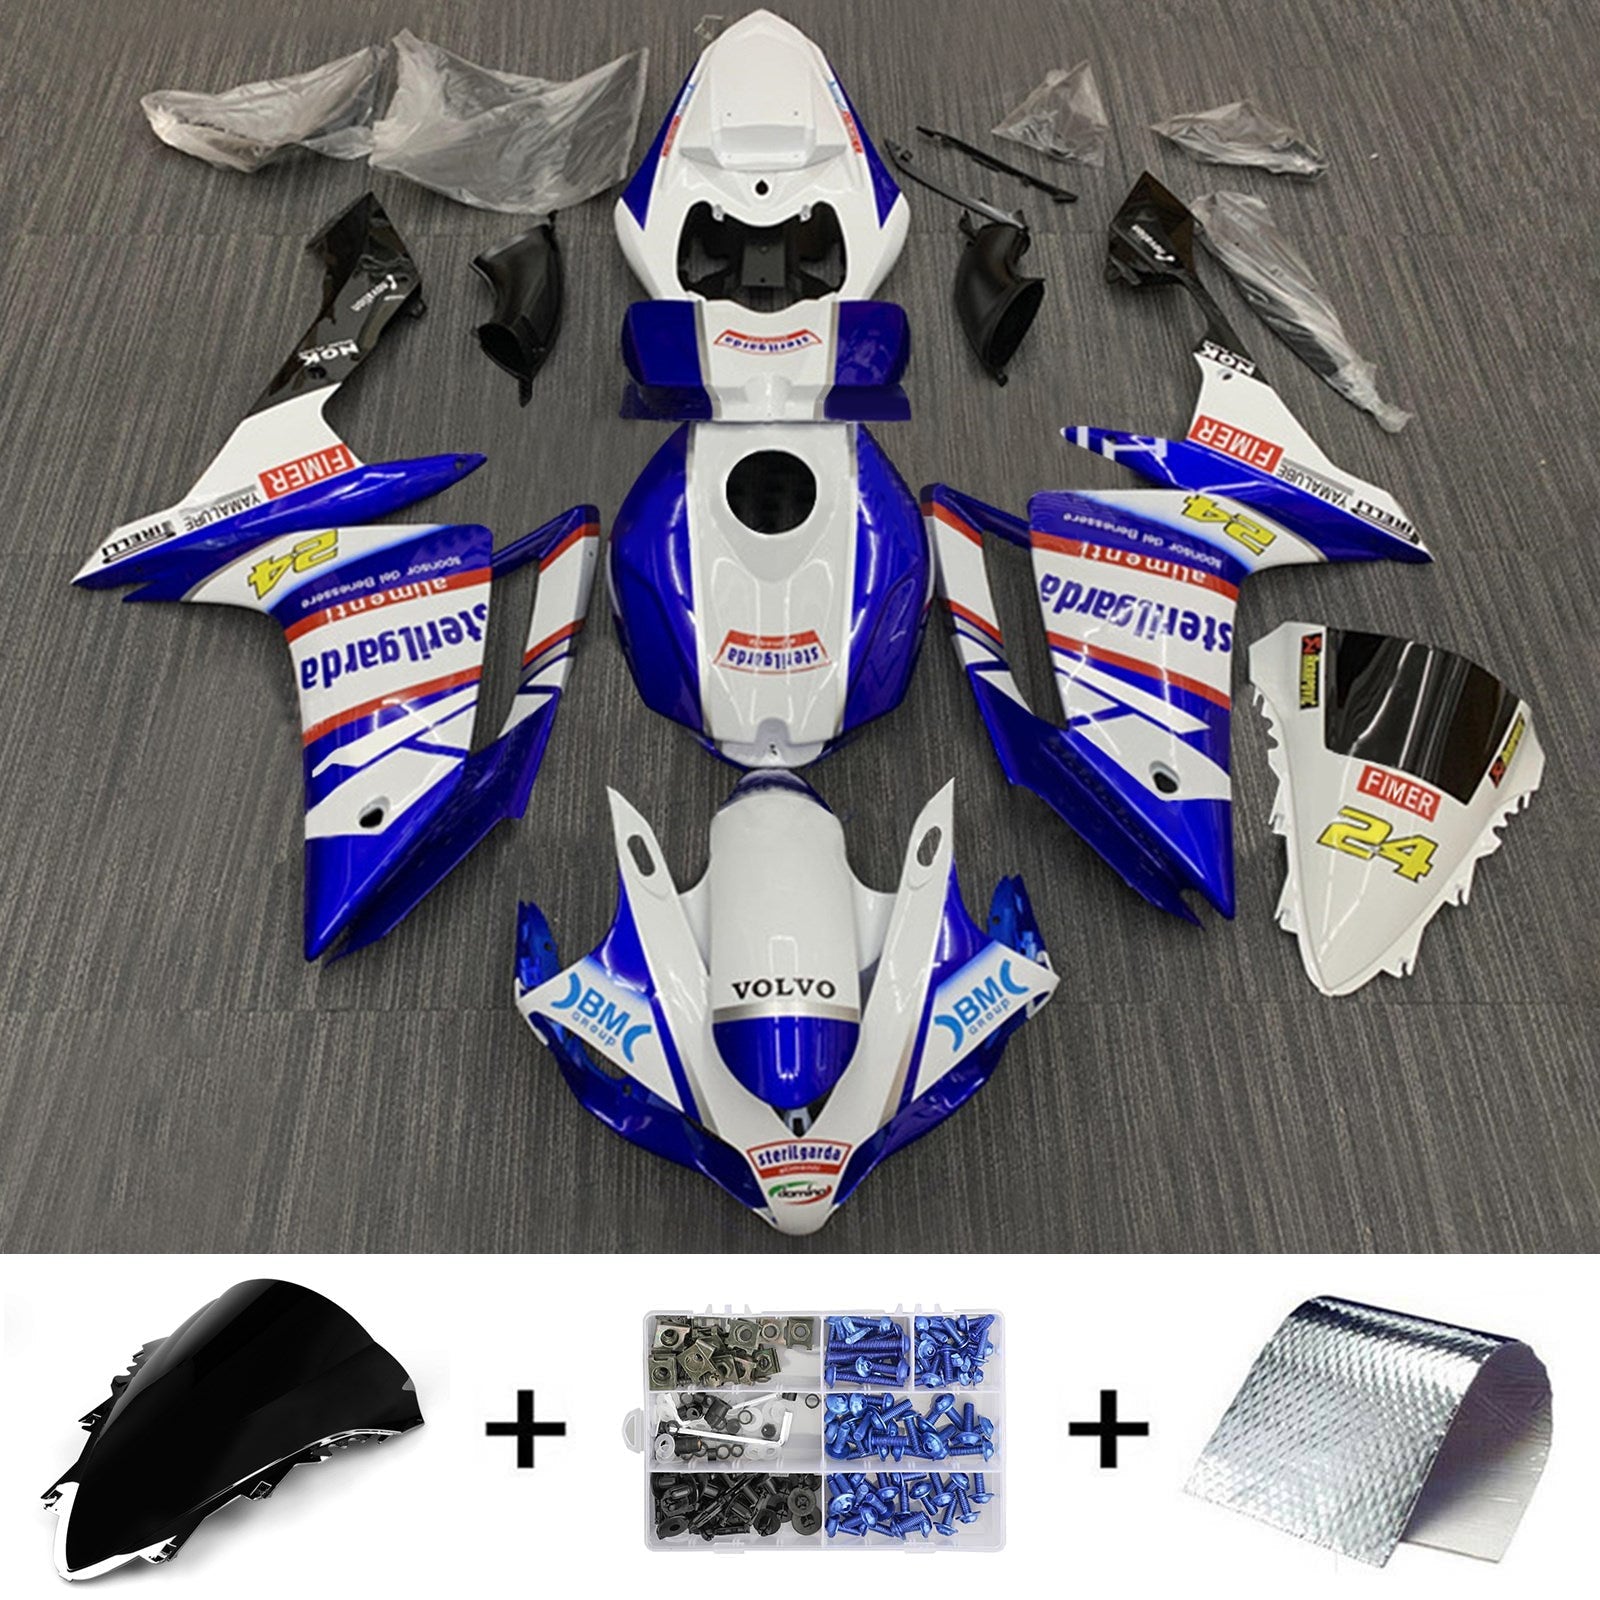 Kit Carena Amotopart Yamaha YZF 1000 R1 2007-2008 Carrozzeria in Plastica ABS